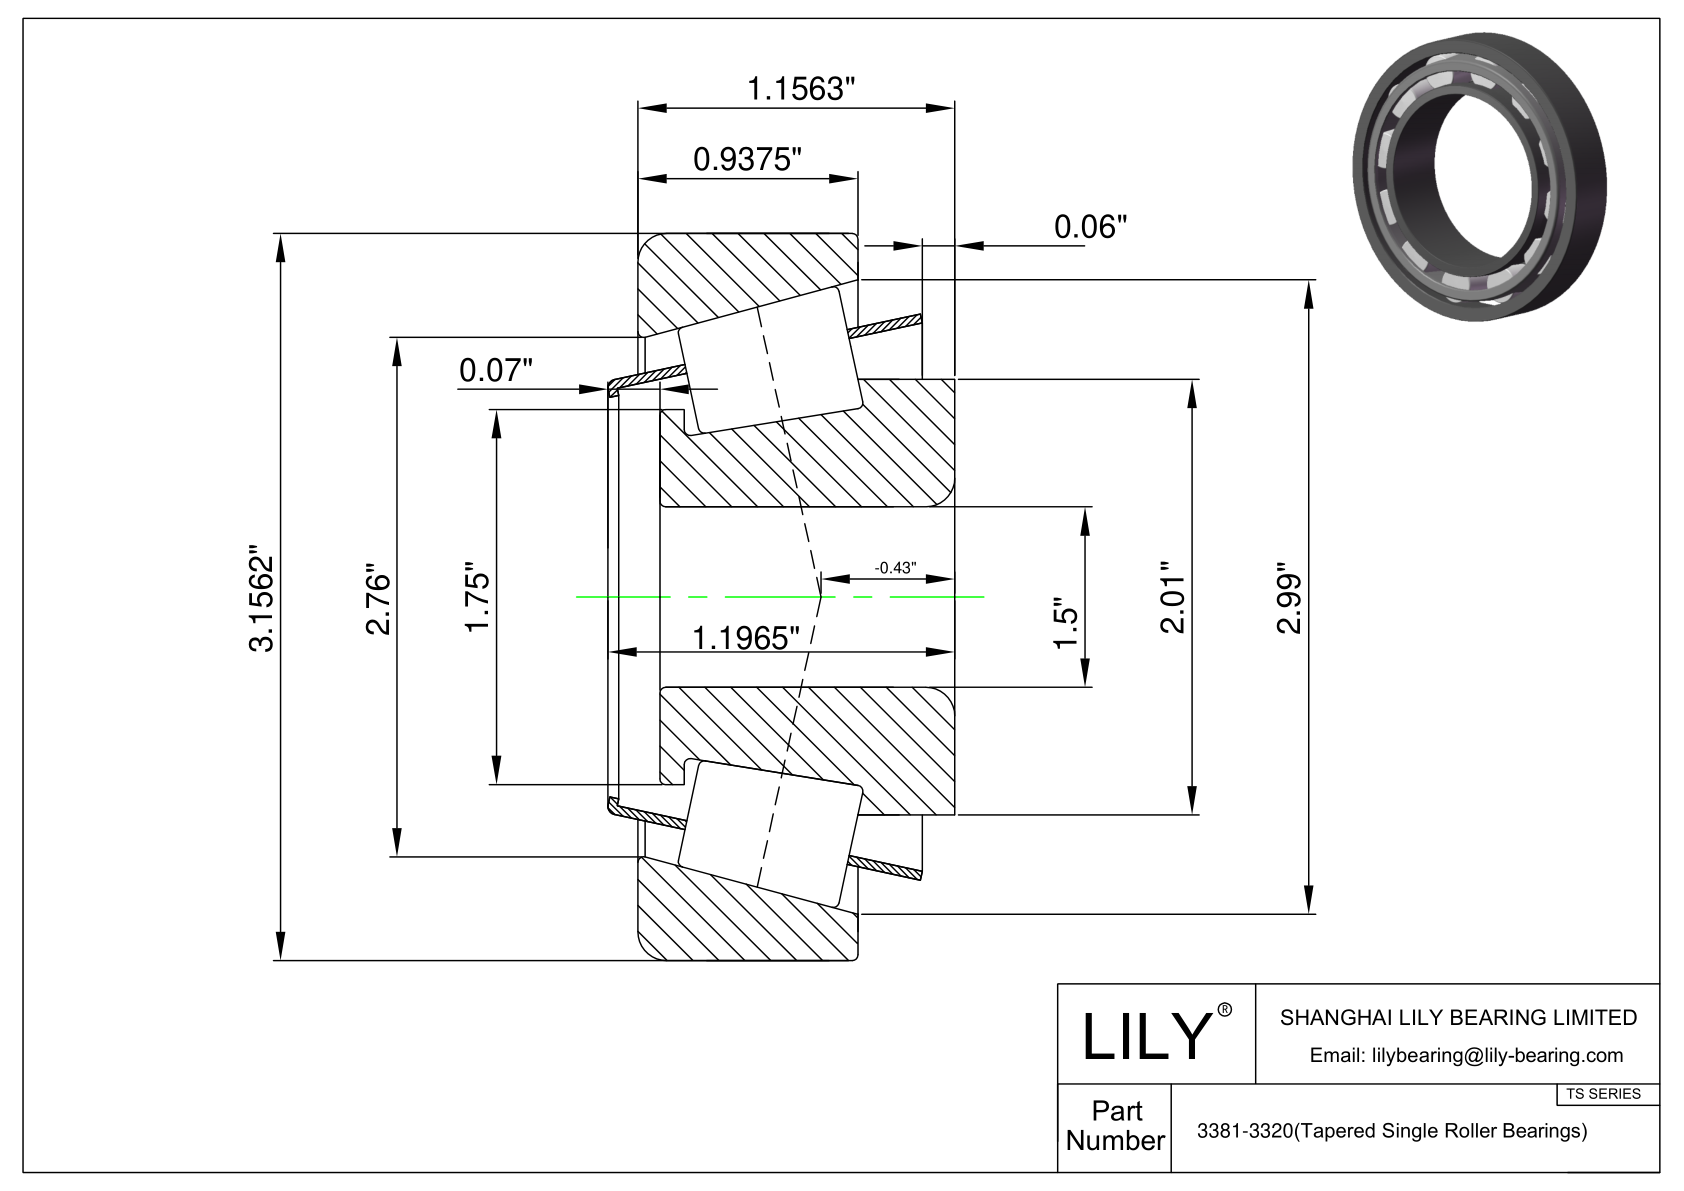 3381-3320 TS (Tapered Single Roller Bearings) (Imperial) cad drawing